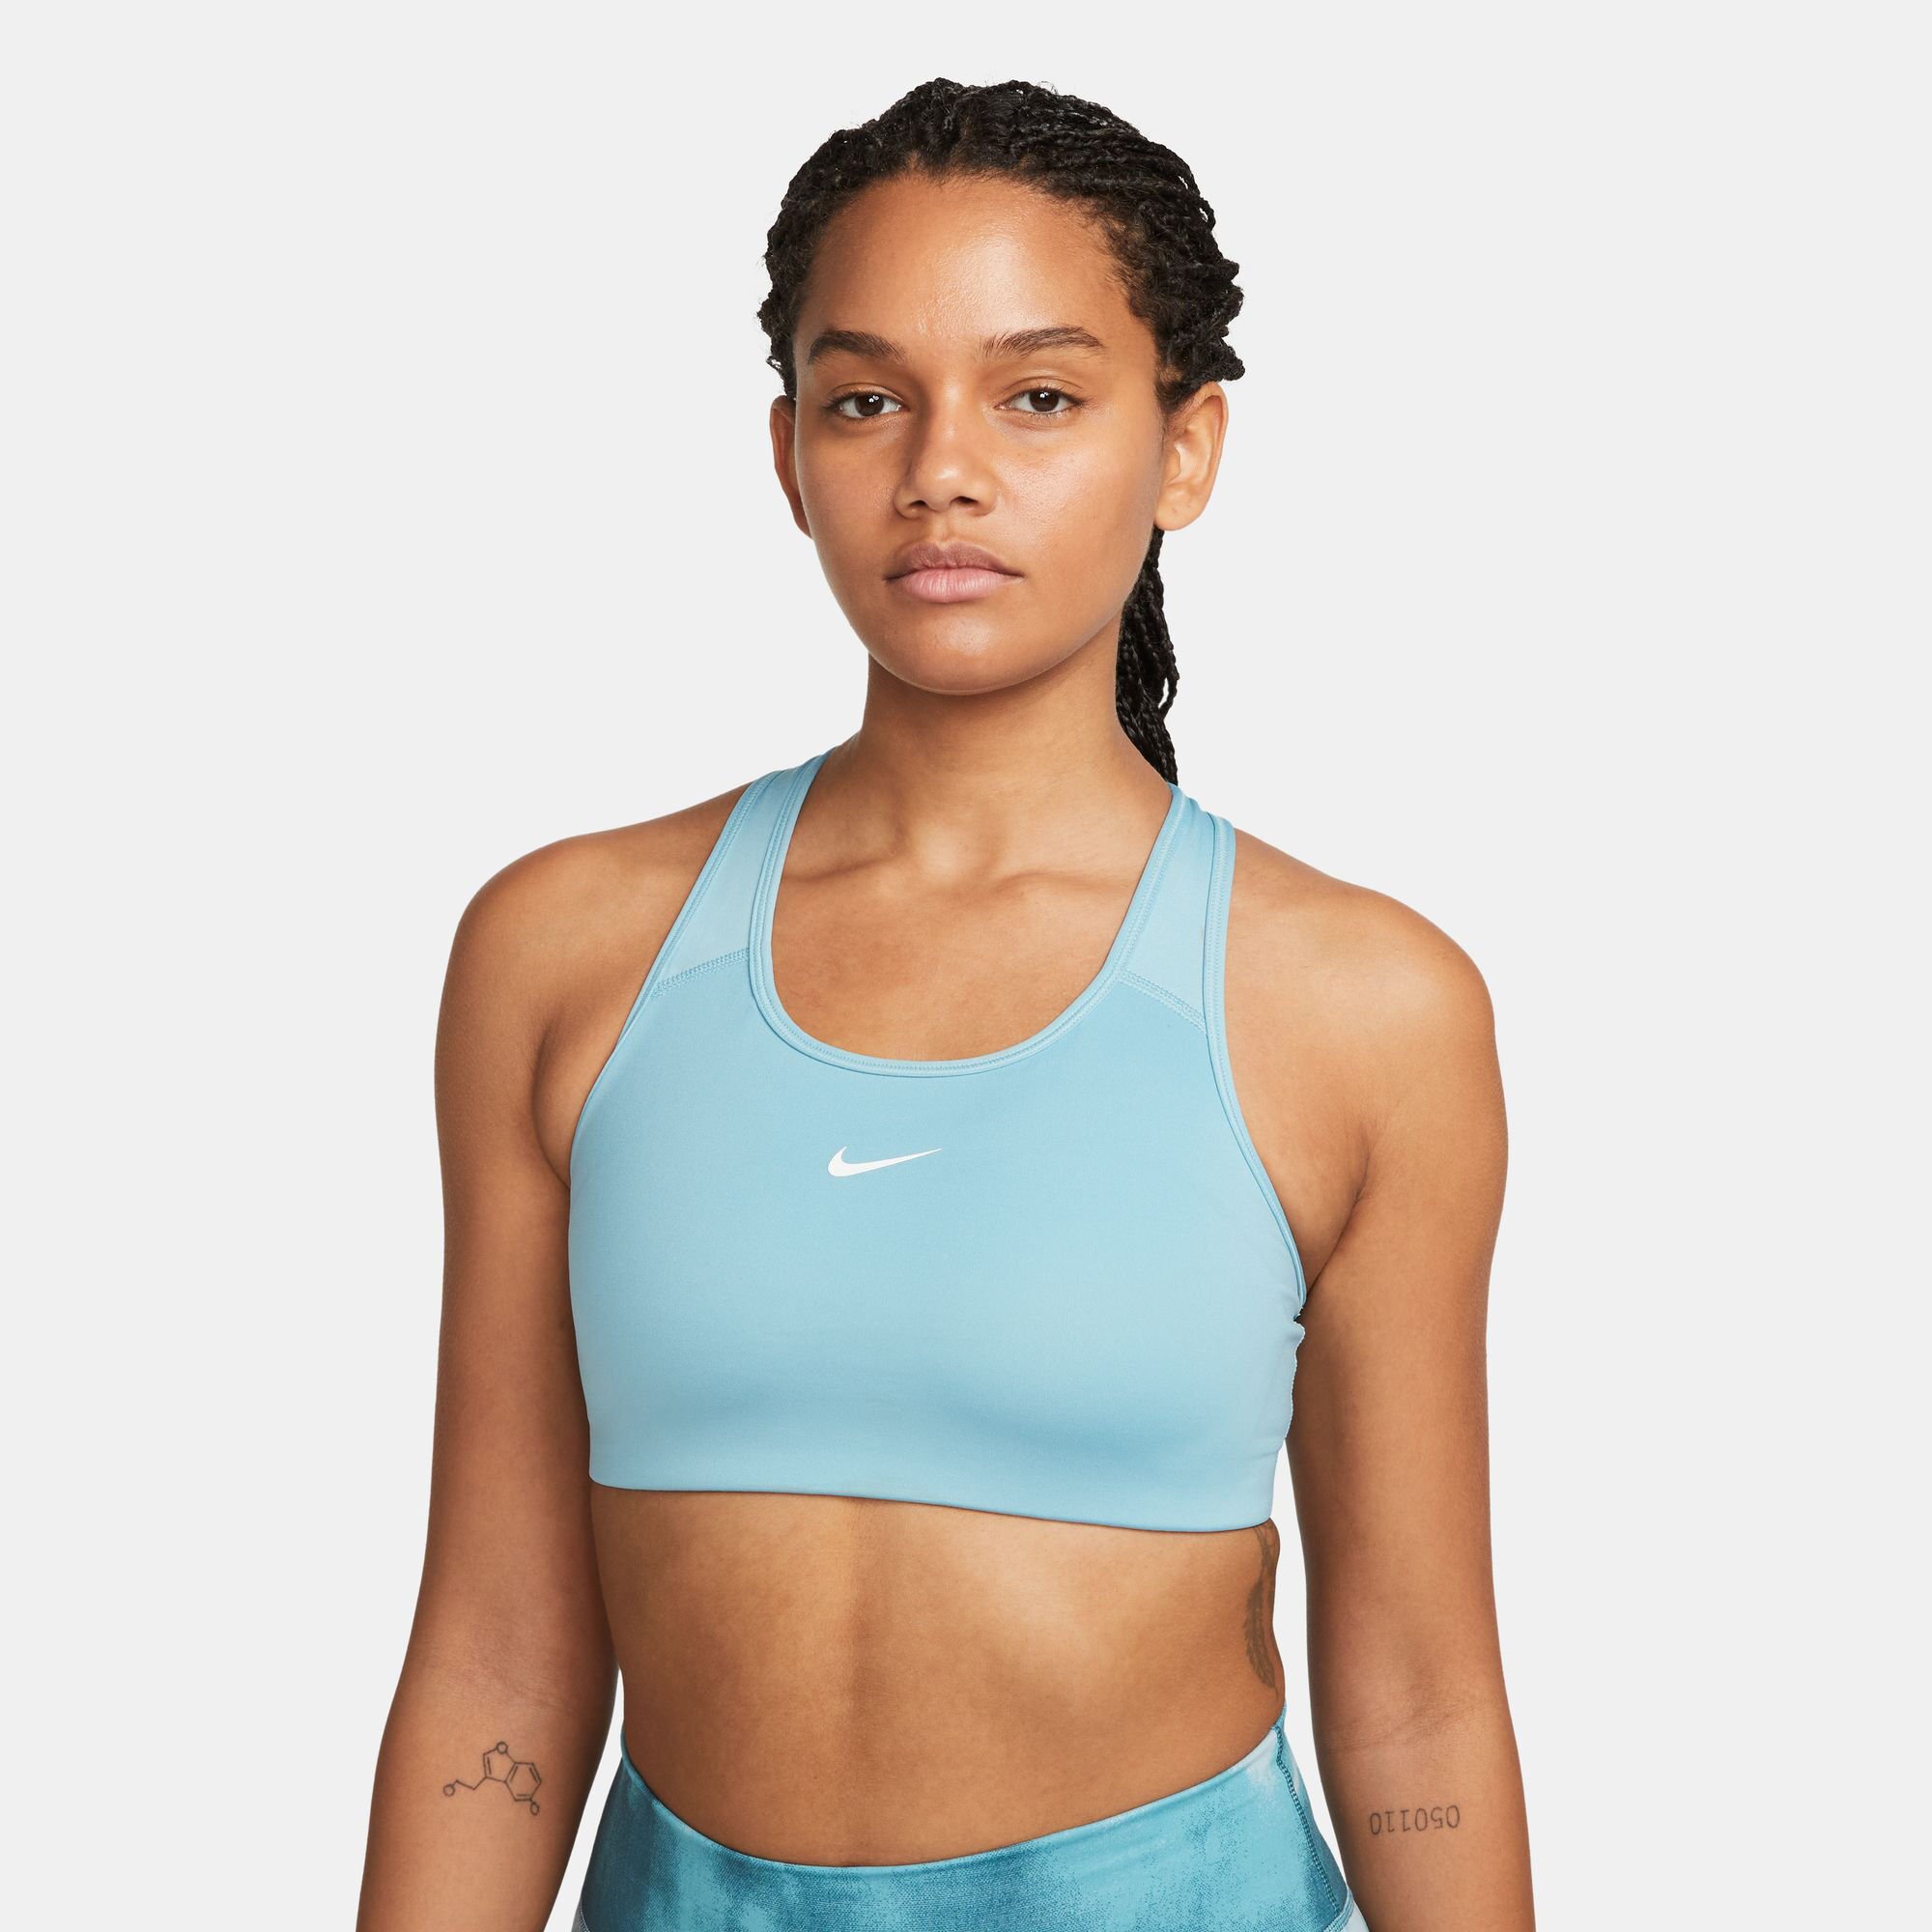 A few months ago I found a nike sports bra that fits and is comfortable.  It's on sale so I just bought it. My official bra size is 30F, I got this